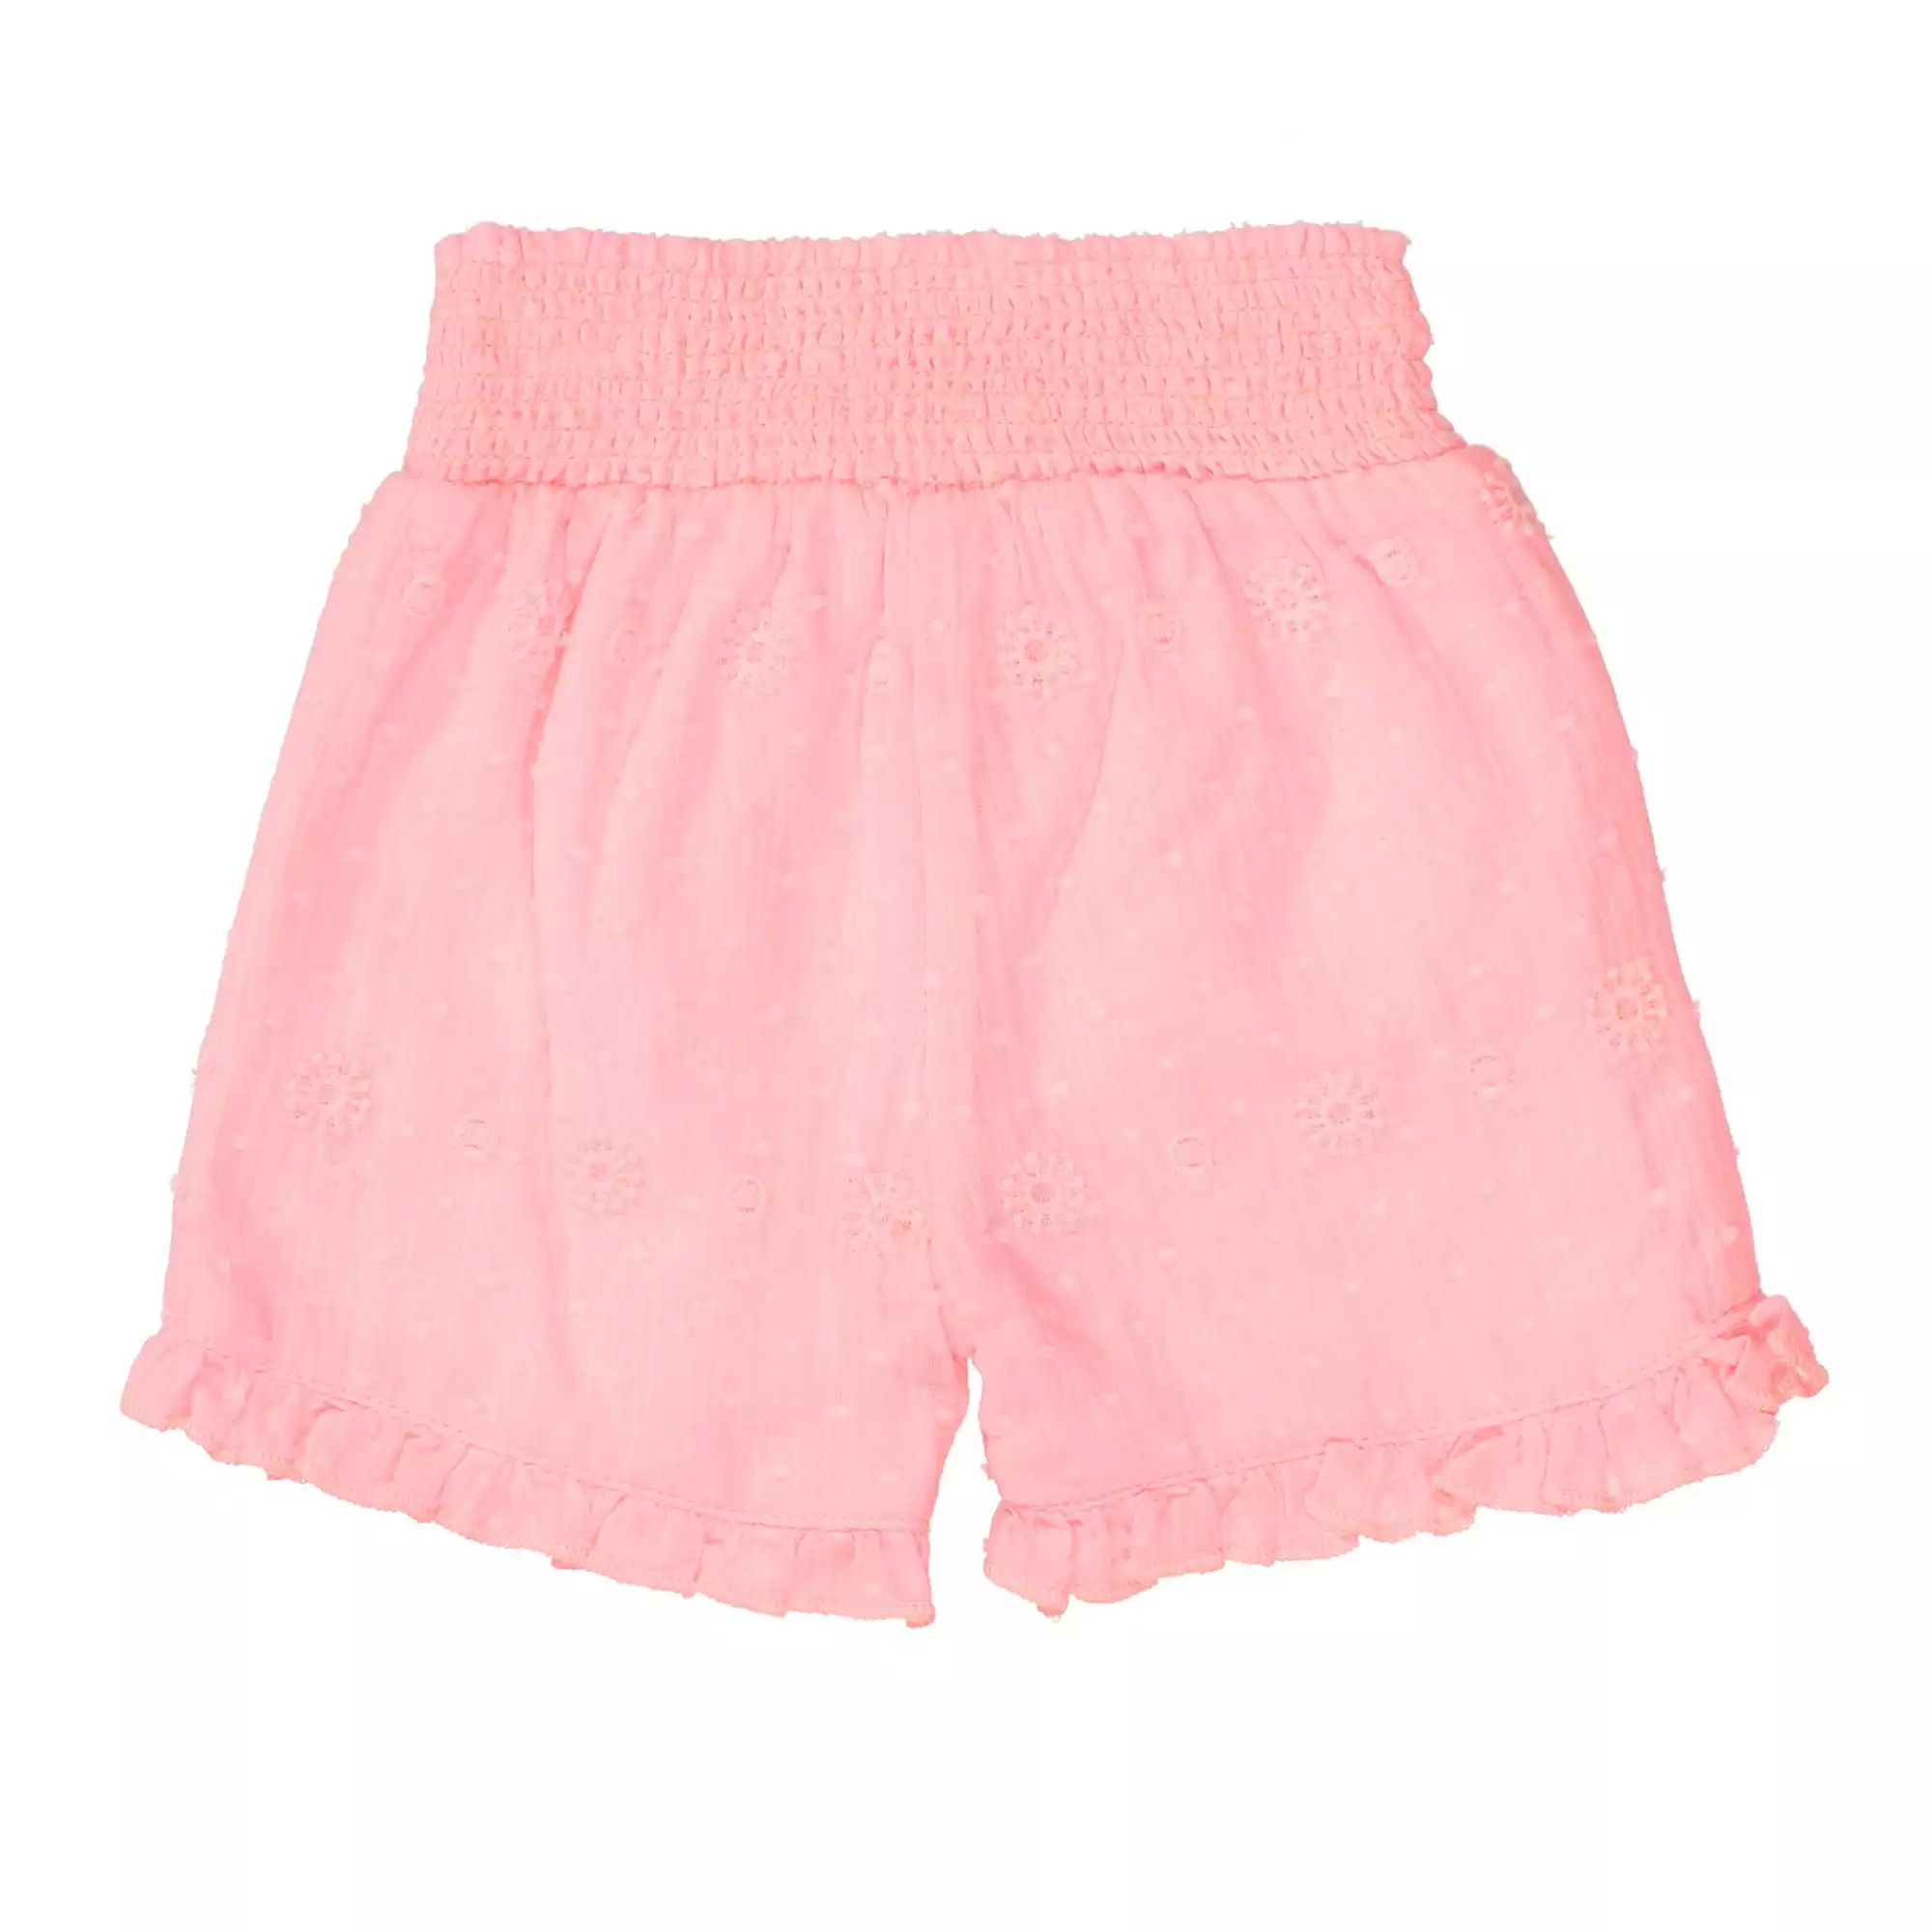 Webshorts STACCATO Pink Rosa M2000582153703 2